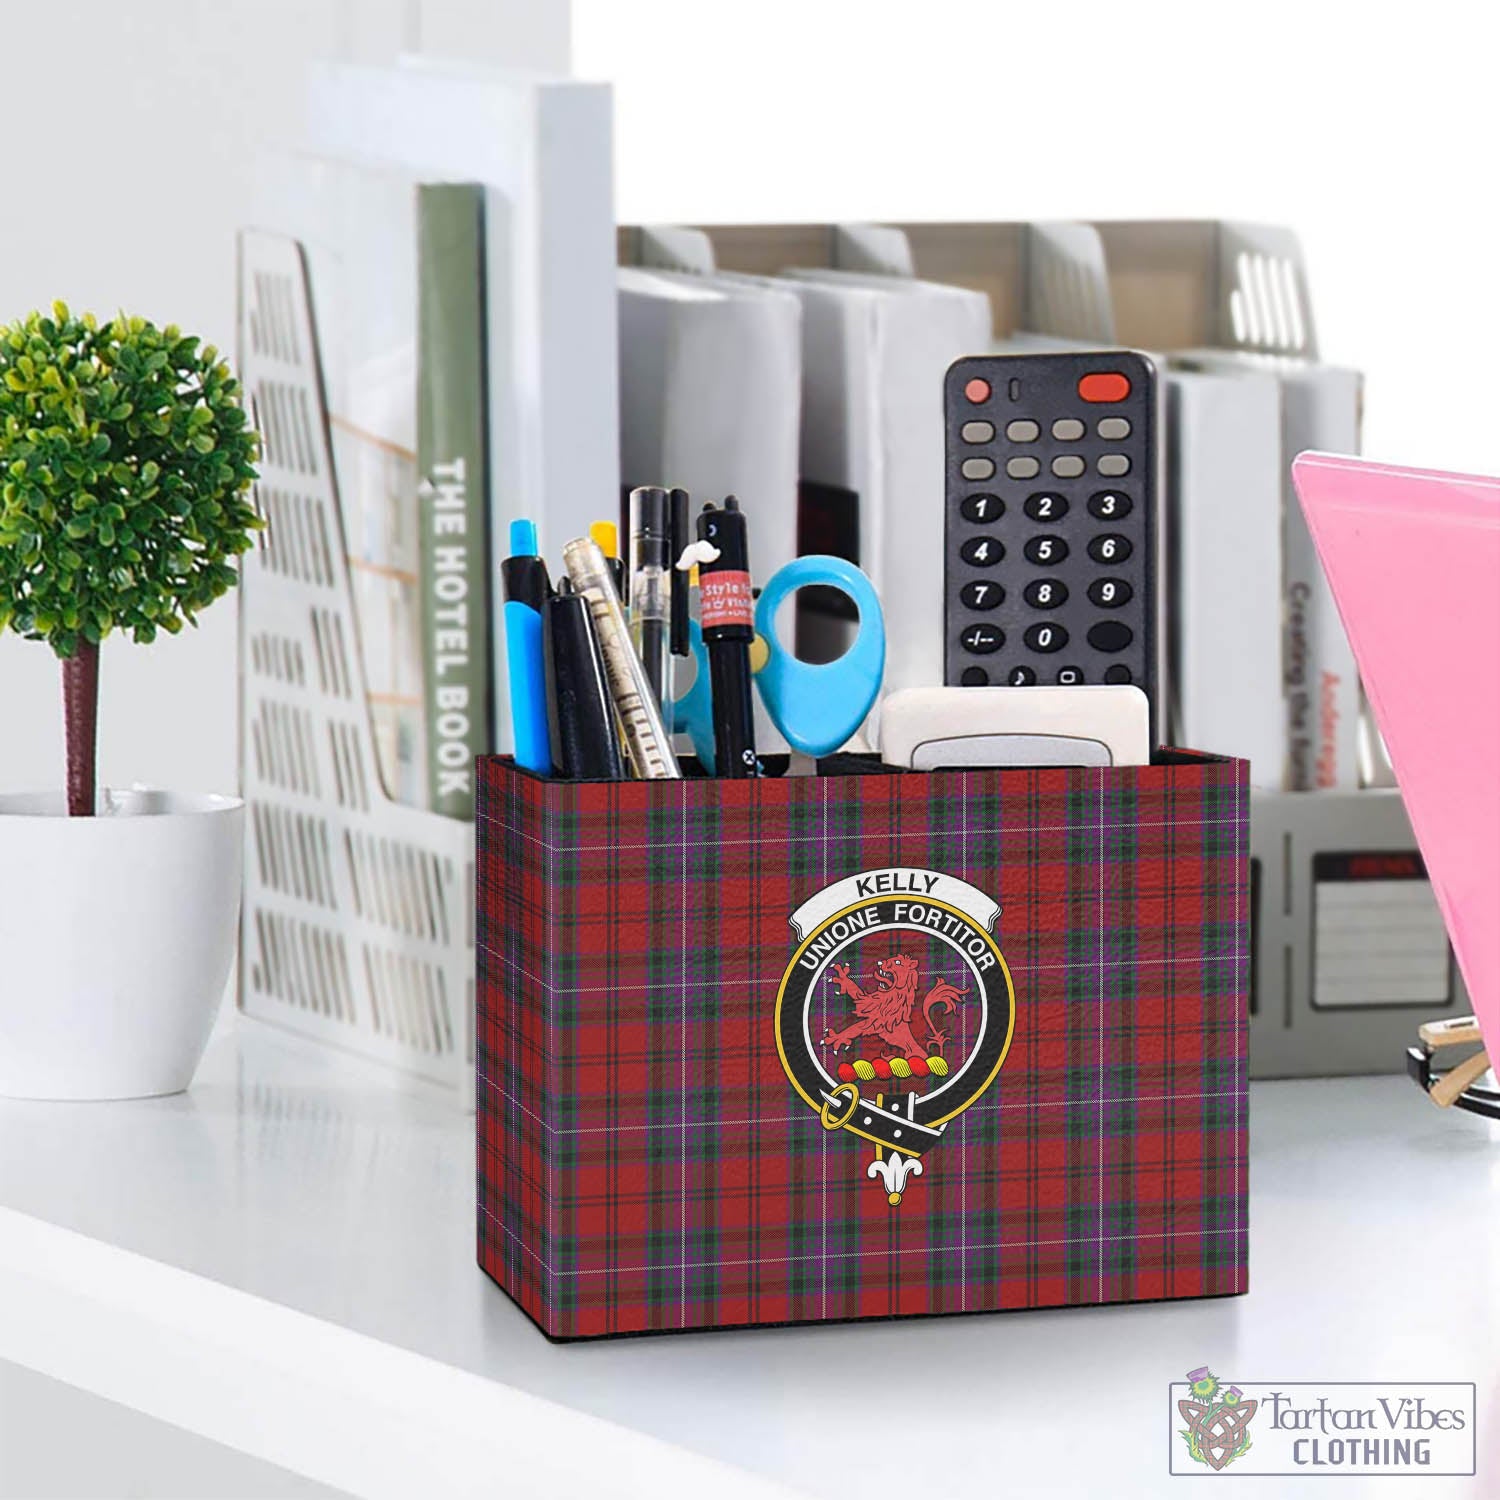 Tartan Vibes Clothing Kelly of Sleat Red Tartan Pen Holder with Family Crest